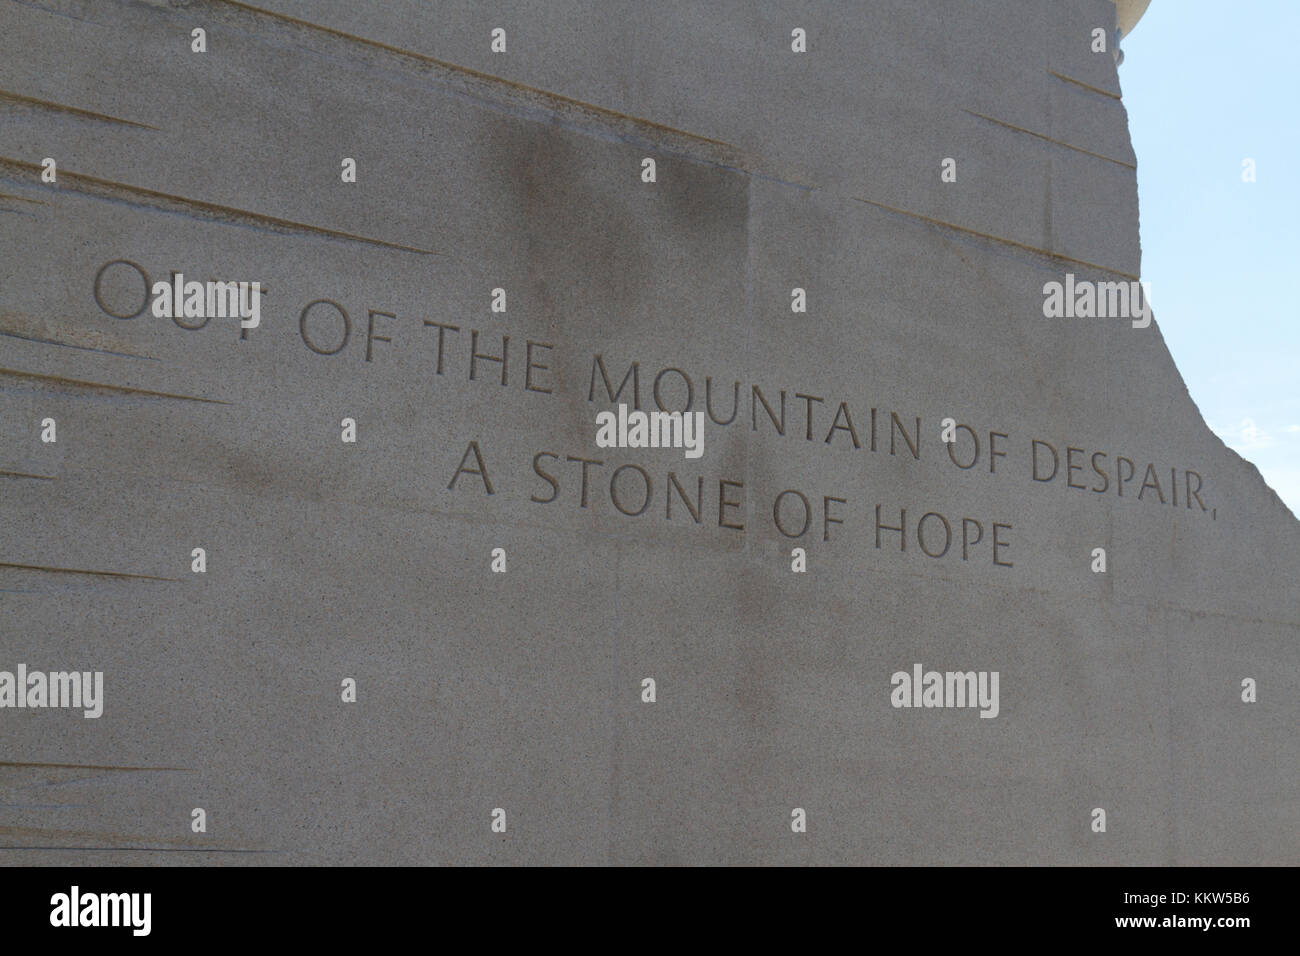 'Out of the mountains of despair, a stone of hope,' inscription on part of the Martin Luther King Jr. Memorial, Washington DC, USA. Stock Photo